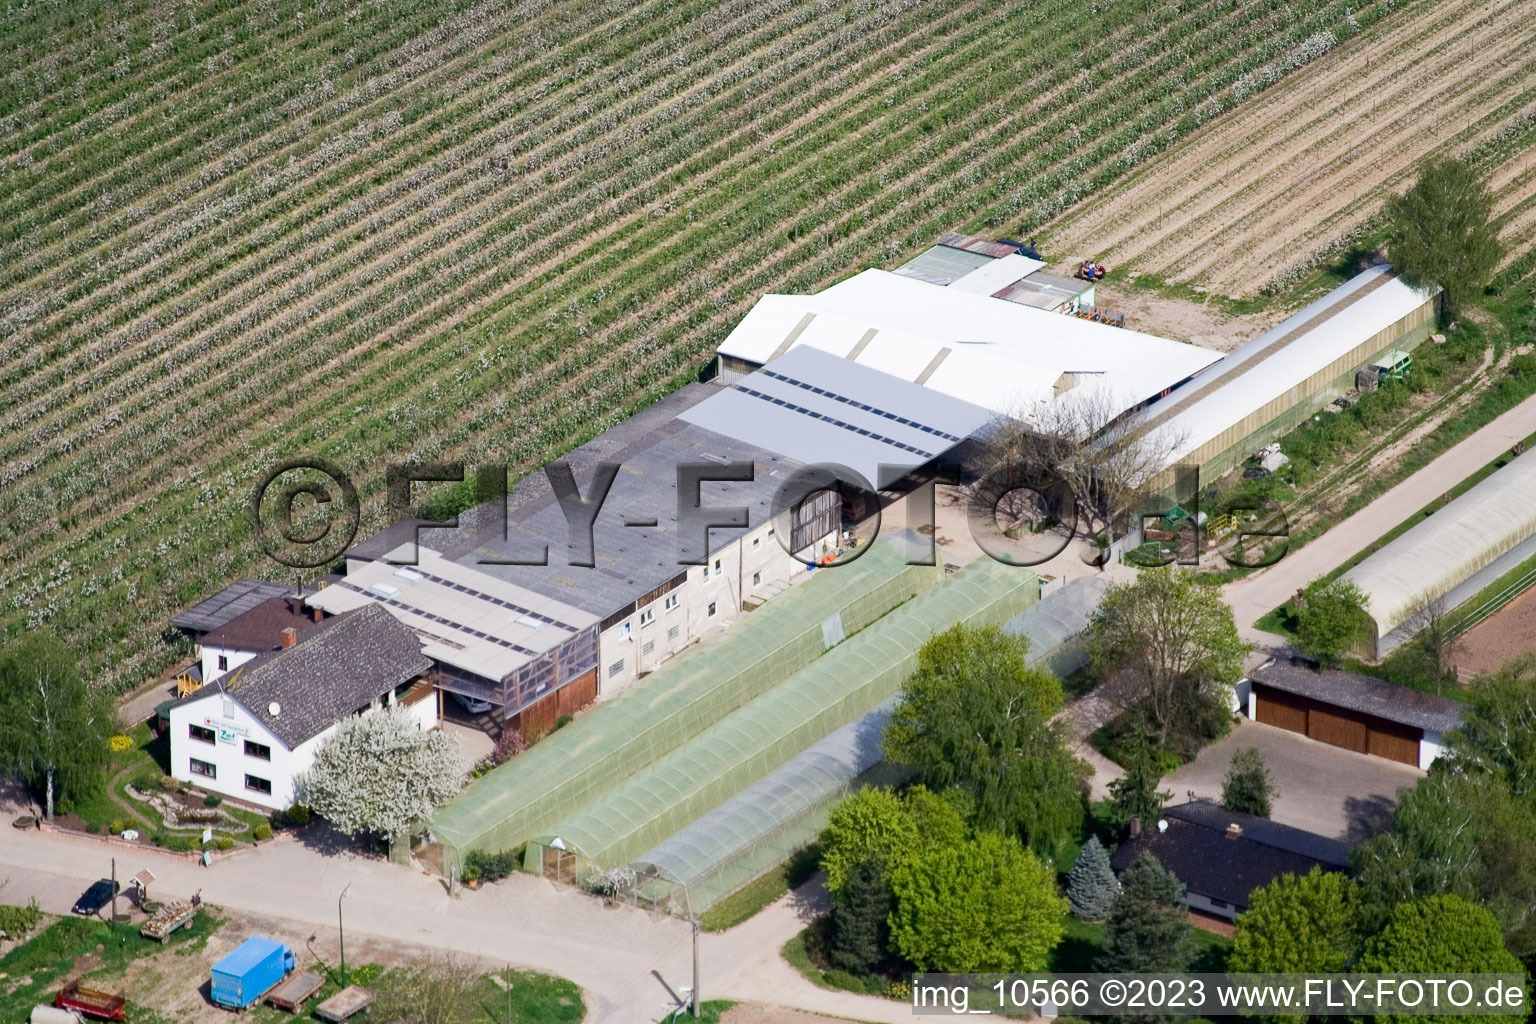 Oblique view of Zapf fruit farm in Kandel in the state Rhineland-Palatinate, Germany